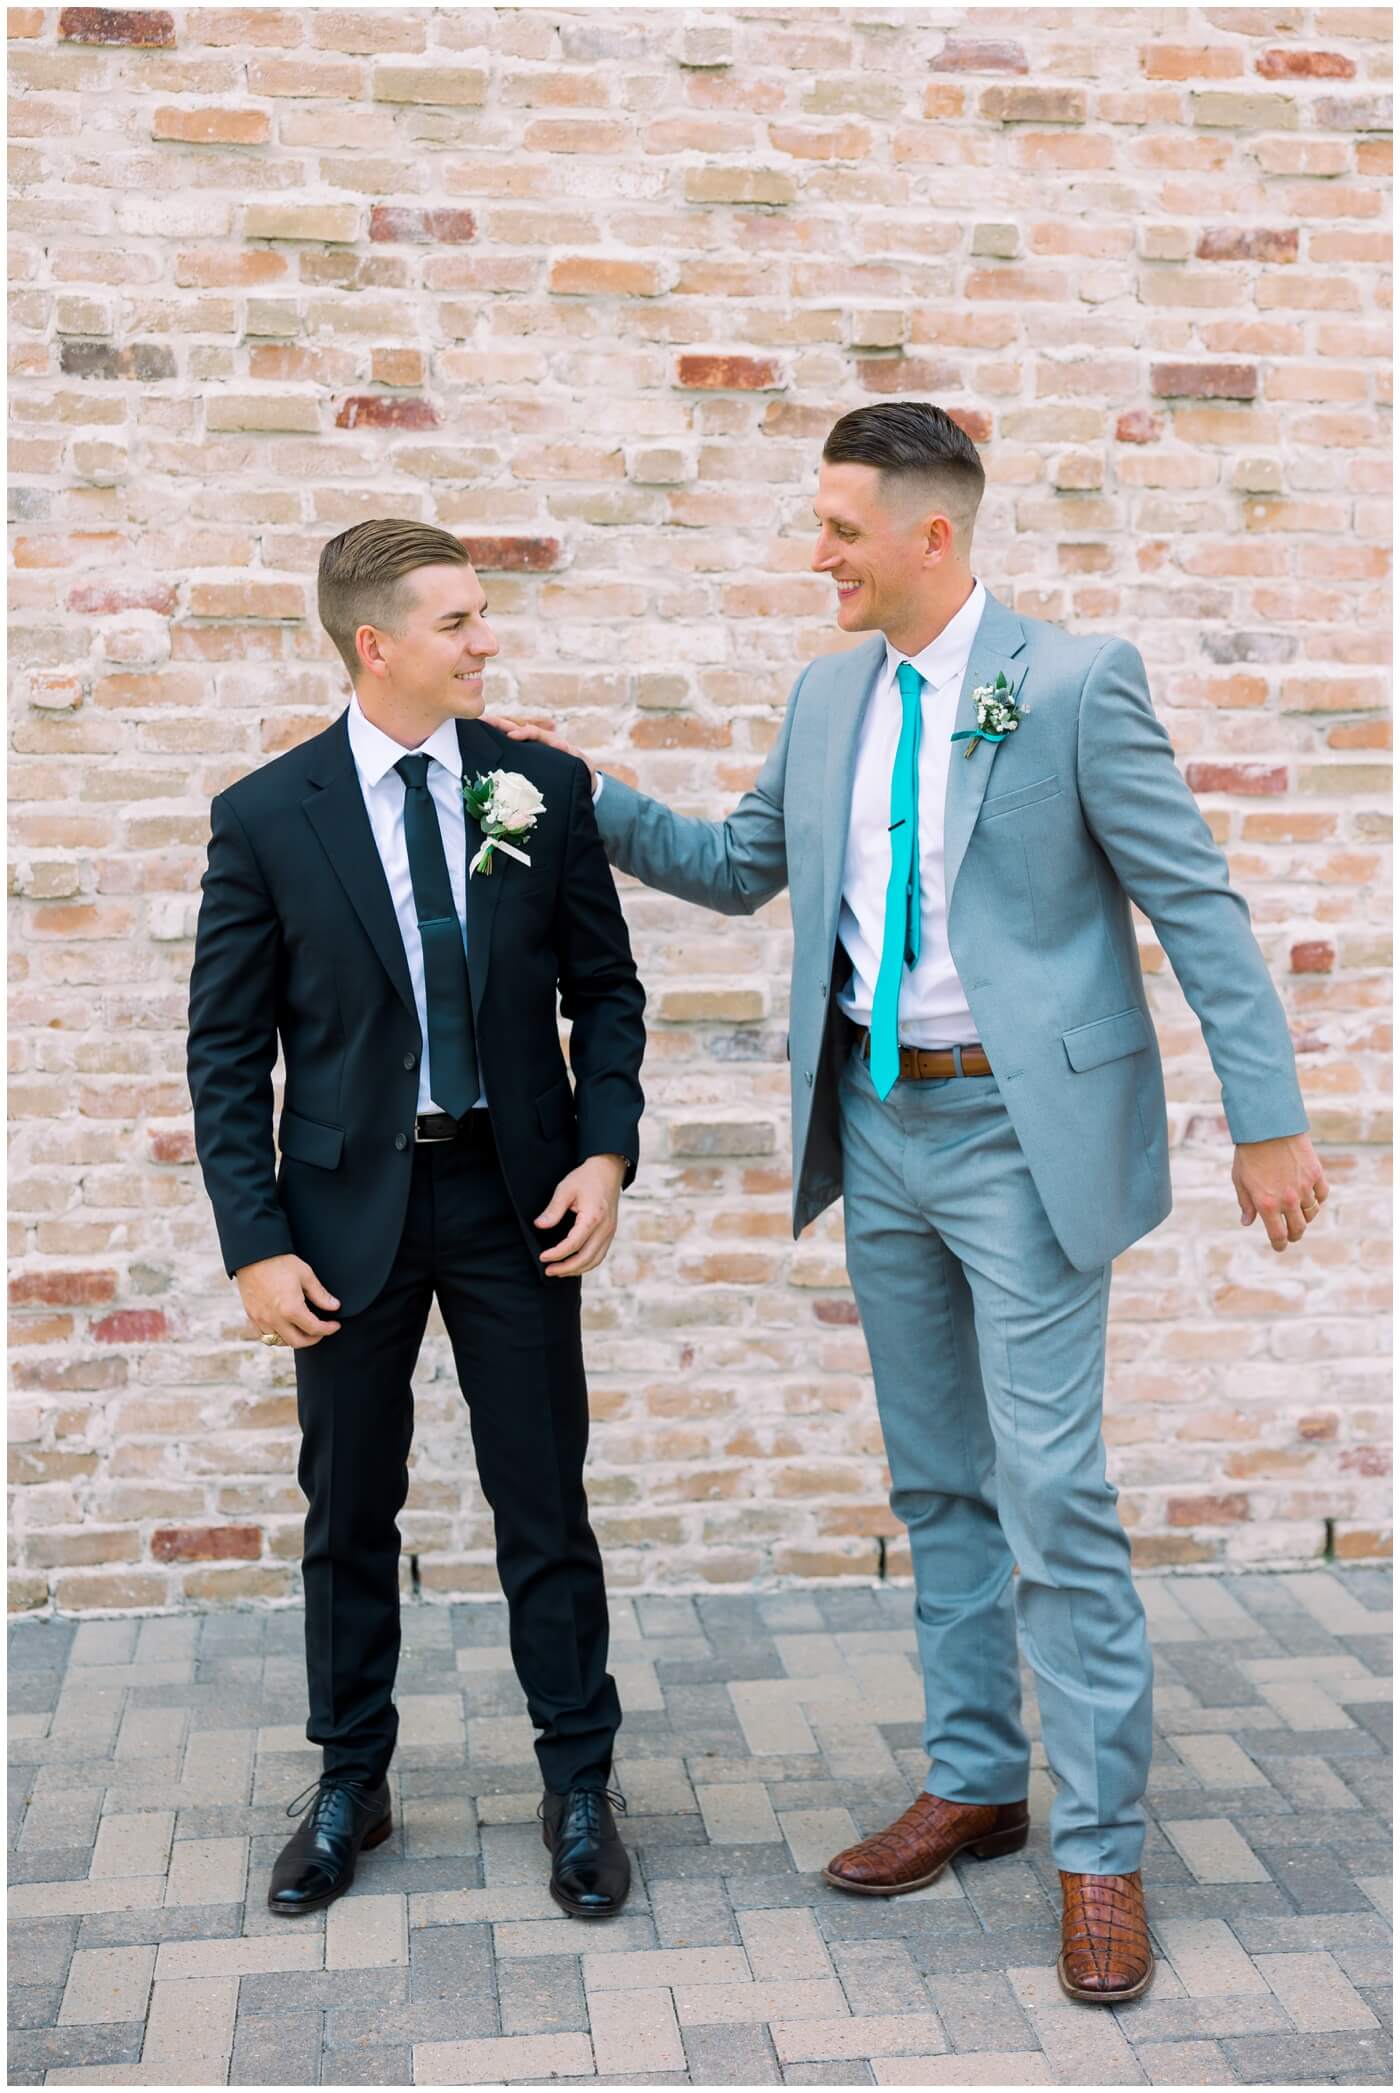 A groom's brother smiles as his brother prepares for his wedding day 